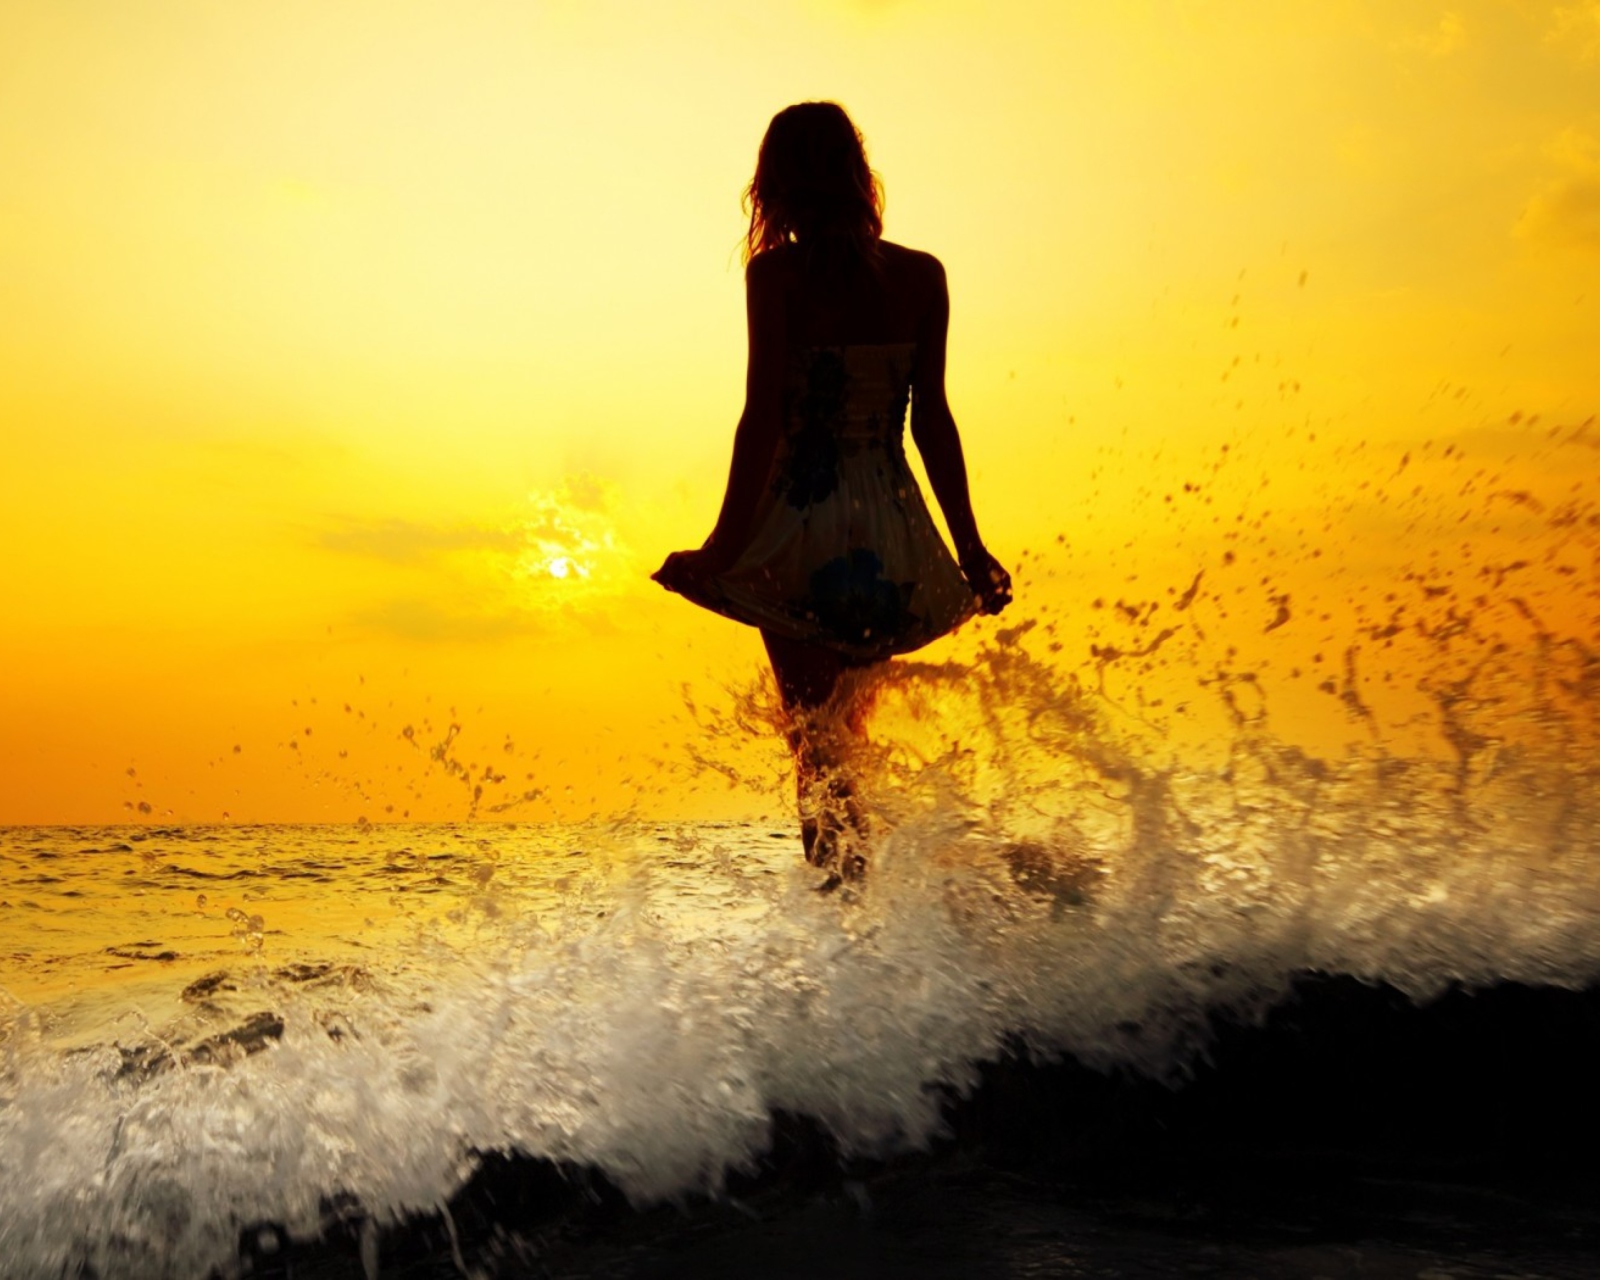 Girl Silhouette In Sea Waves At Sunset wallpaper 1600x1280